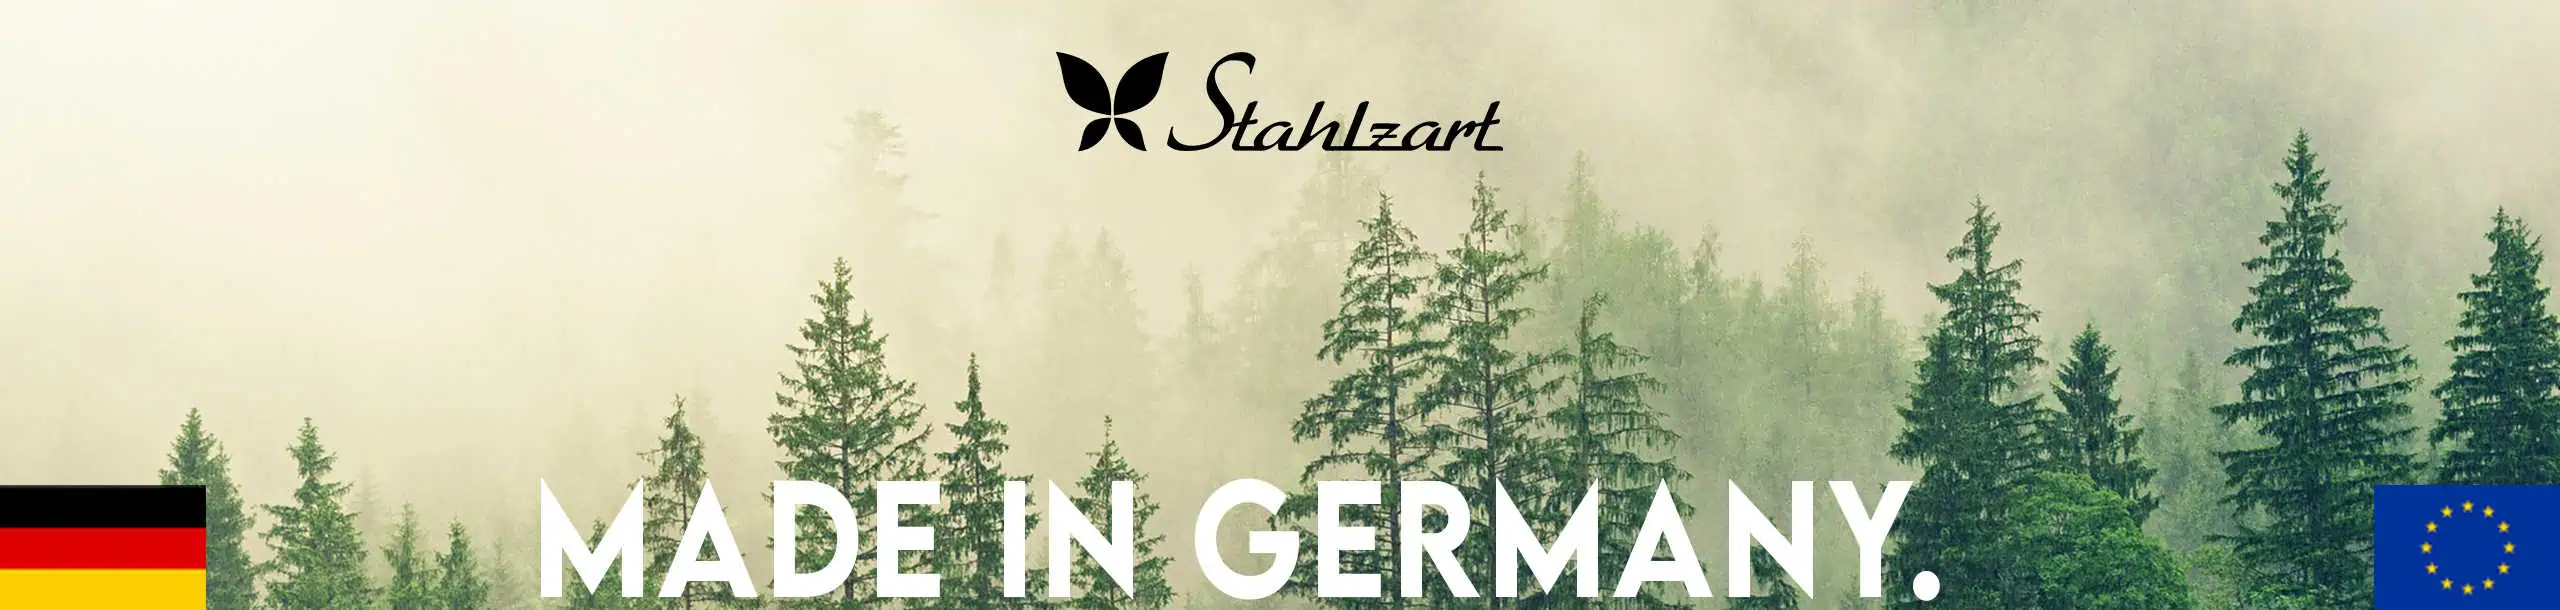 stahlzart-made-in-germany